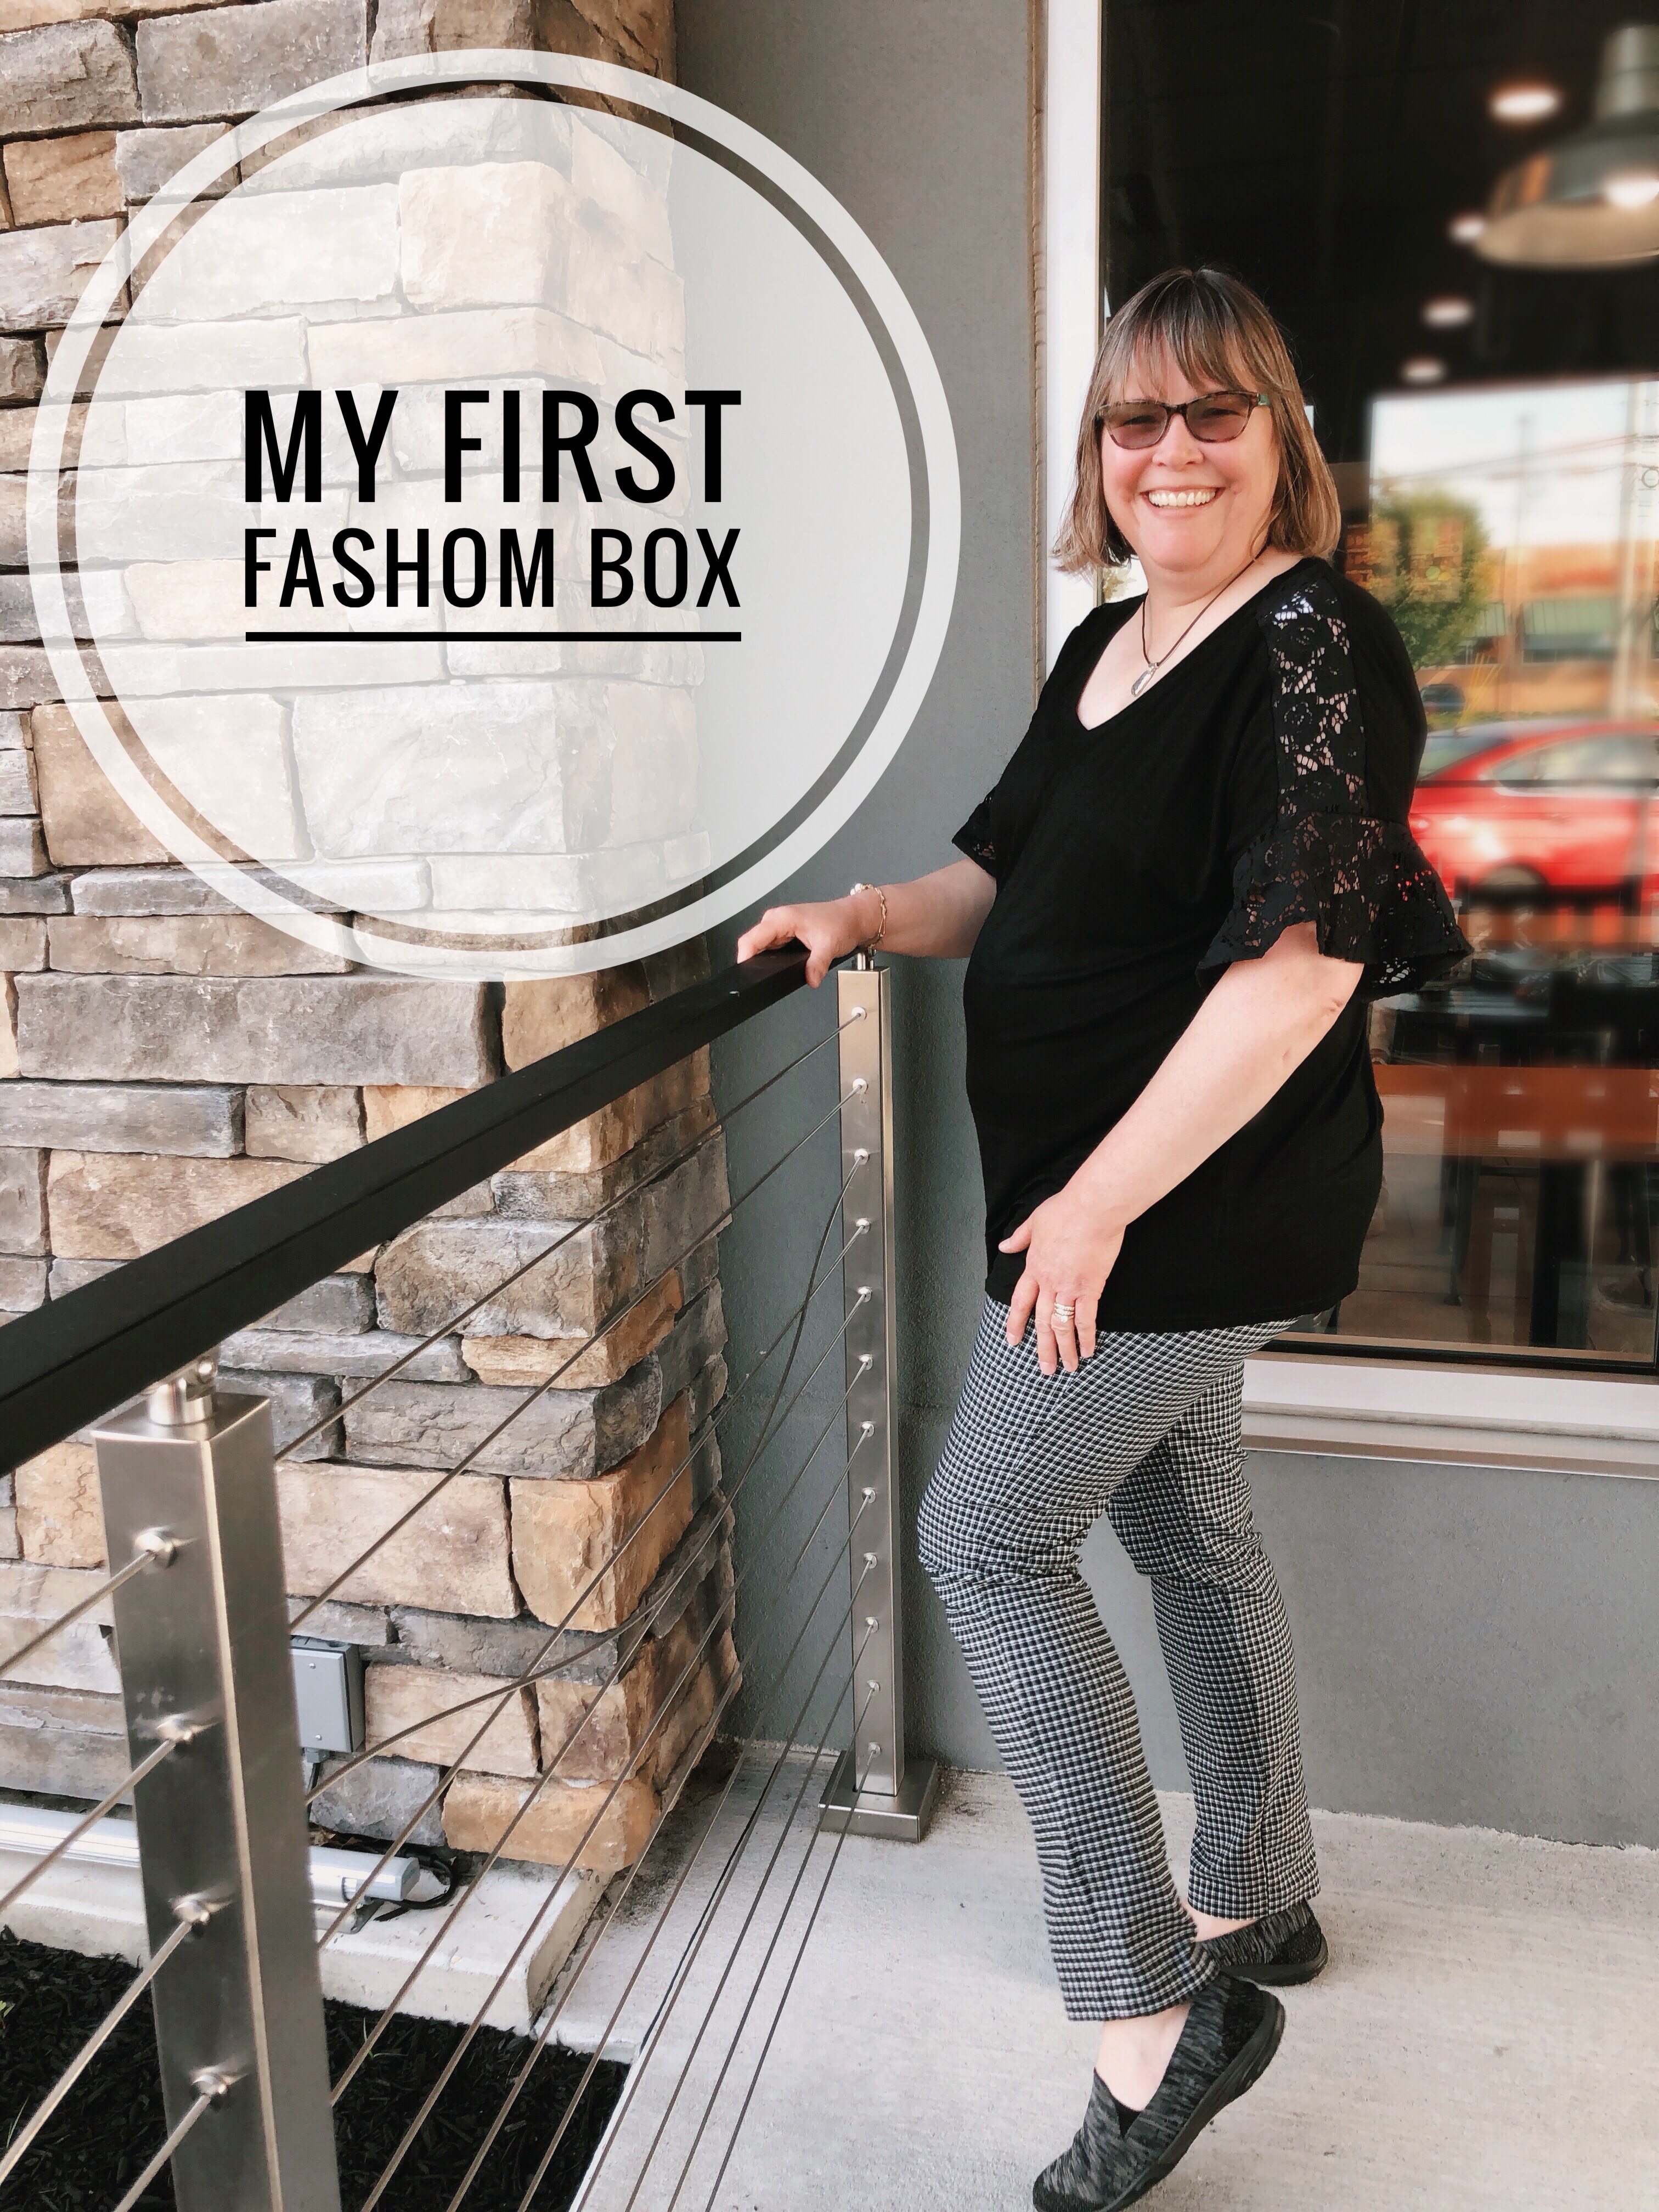 Fashom is a new fashion styling service that in some ways is similar to Stitch Fix. See what I thought about my first Fashom Box and the fashions I received. Plus, get $10 off your first Fashom box.